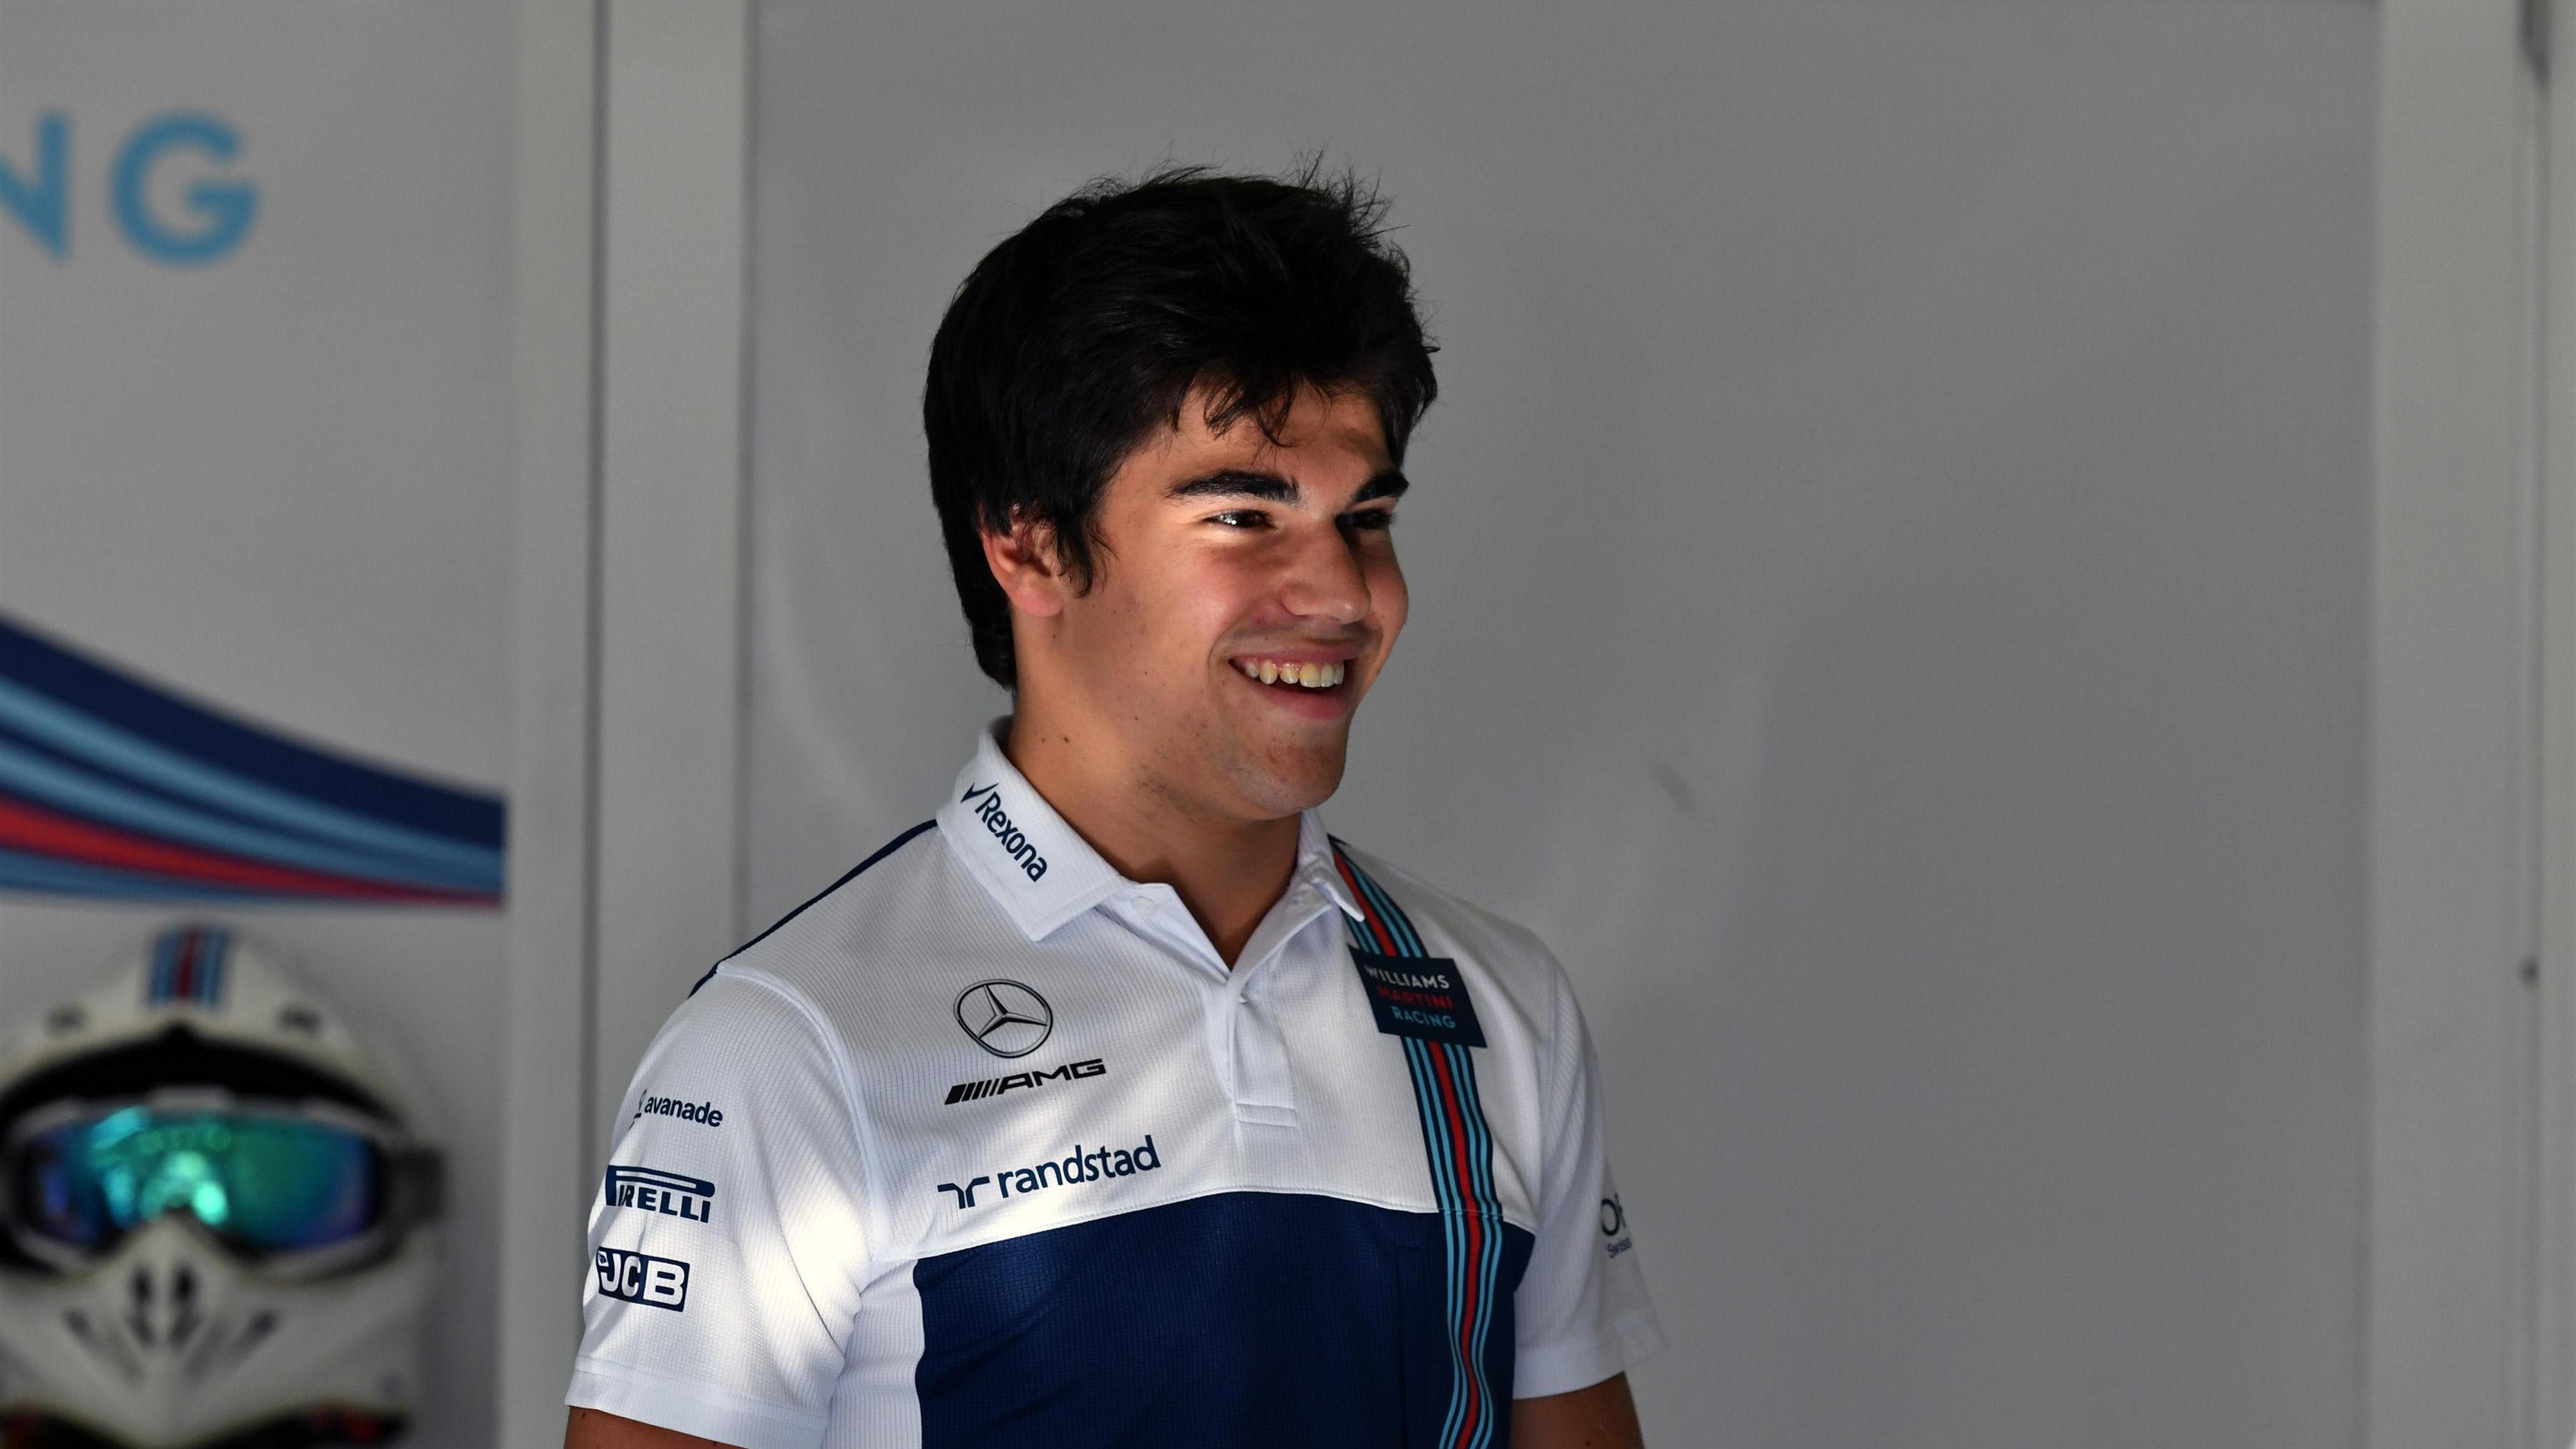 ‘The tables will turn’ - Lance Stroll Q&A